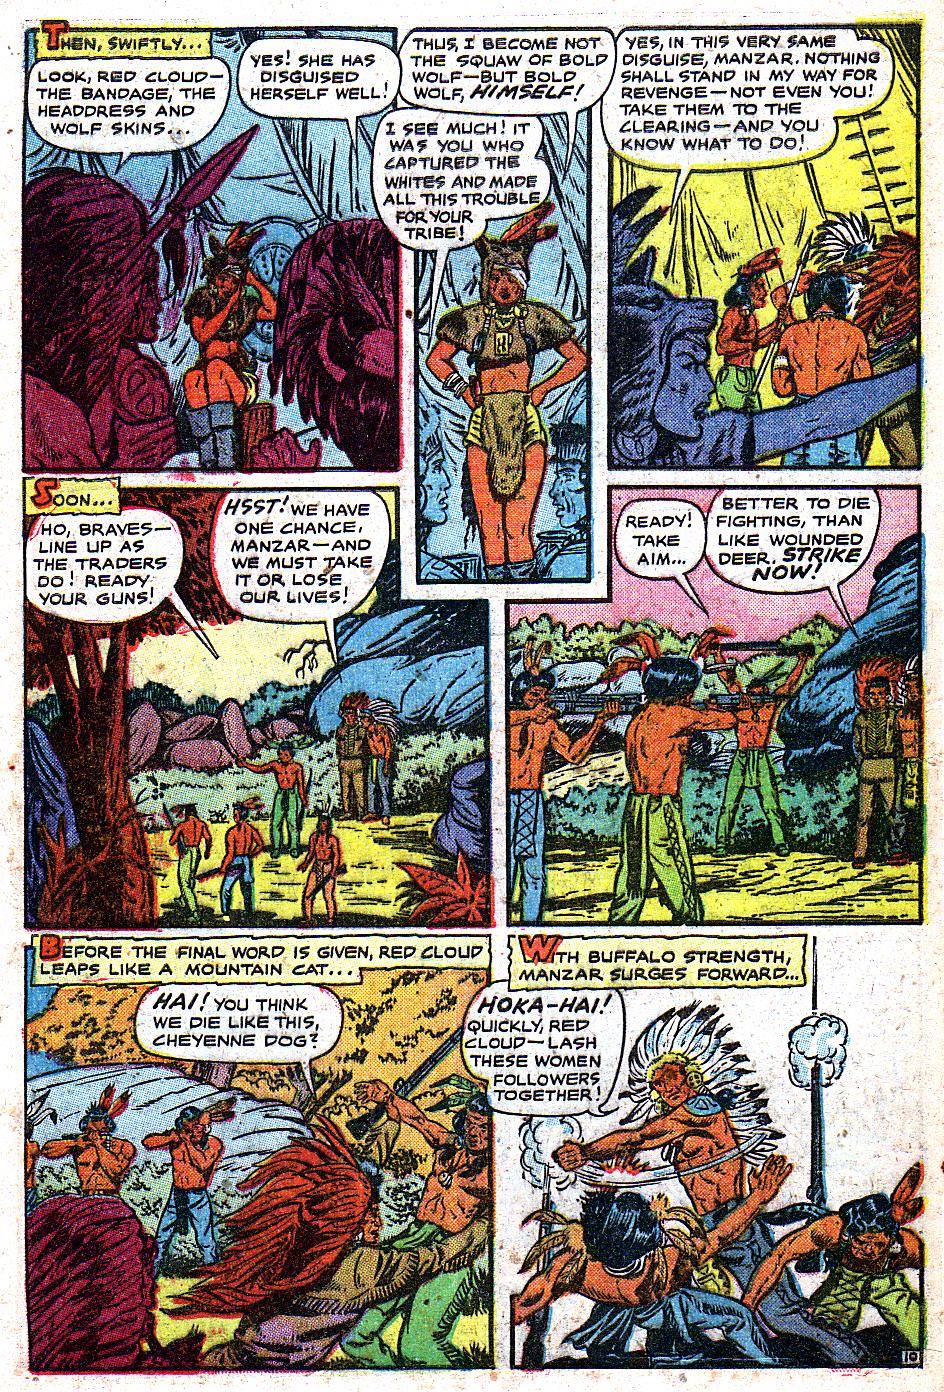 Read online Indians comic -  Issue #7 - 13